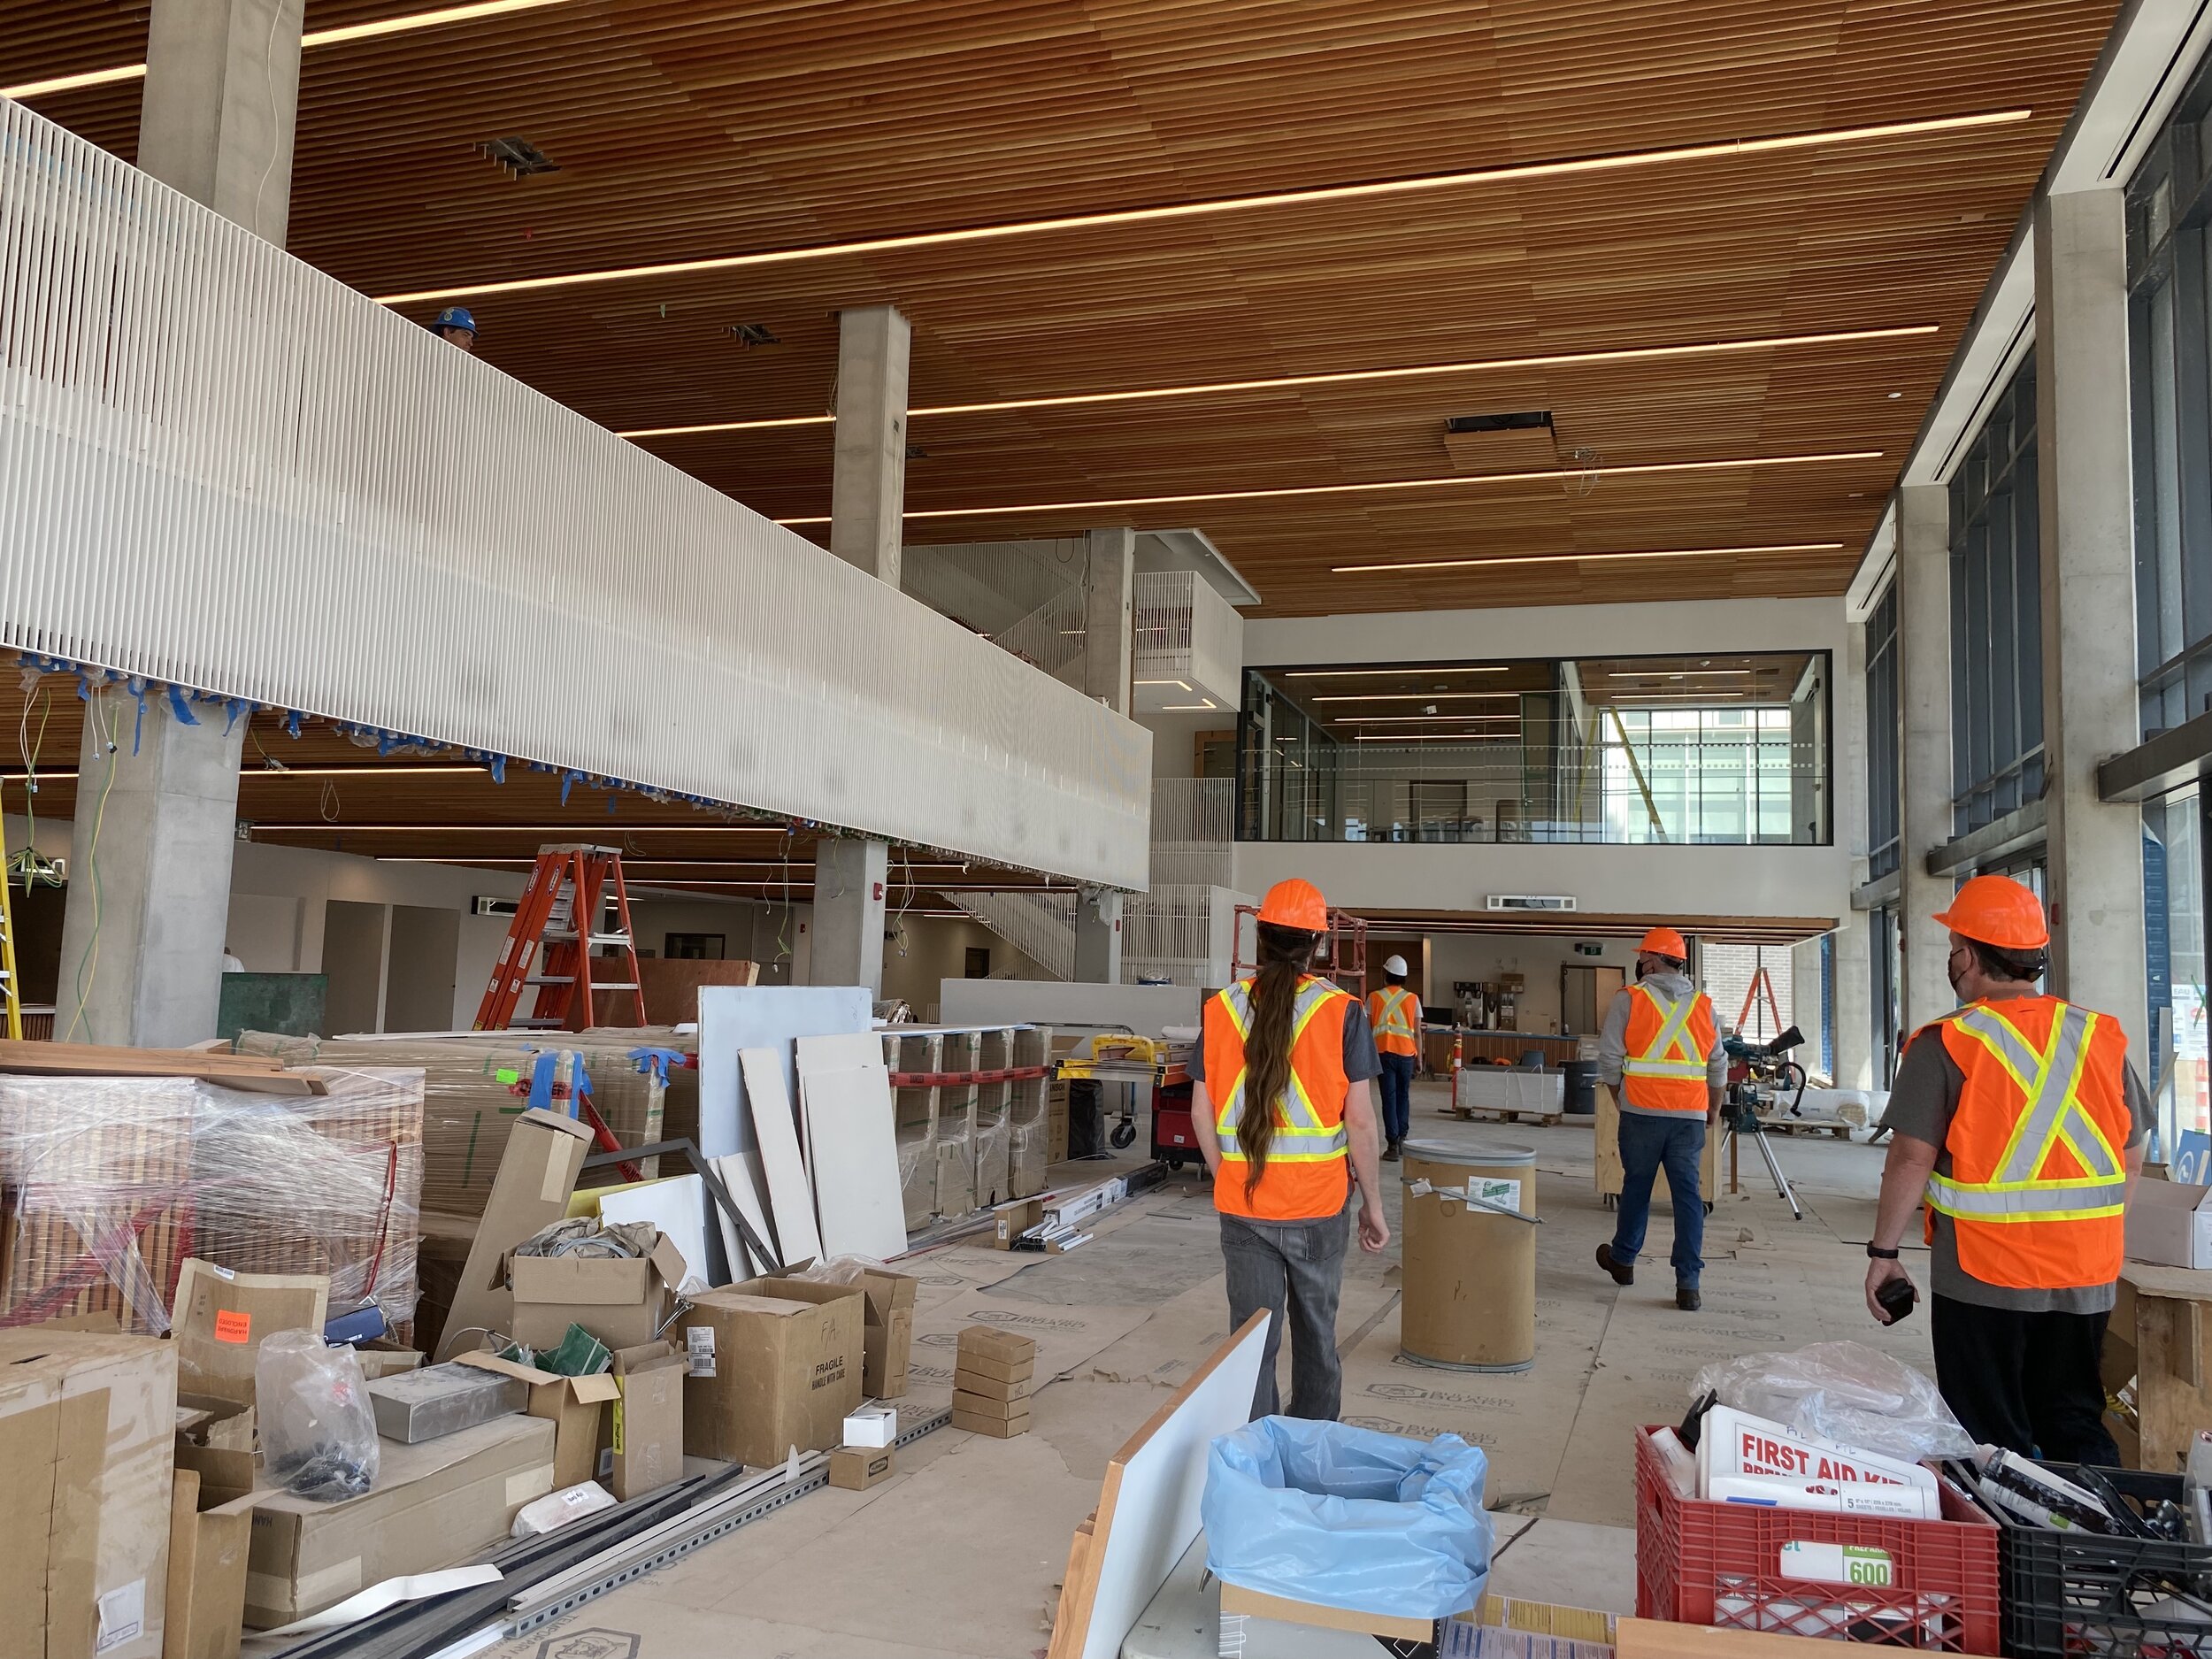  Here’s another view of the Open Space Area in Sheridan’s new Student Centre and Athletic Building at HMC.  